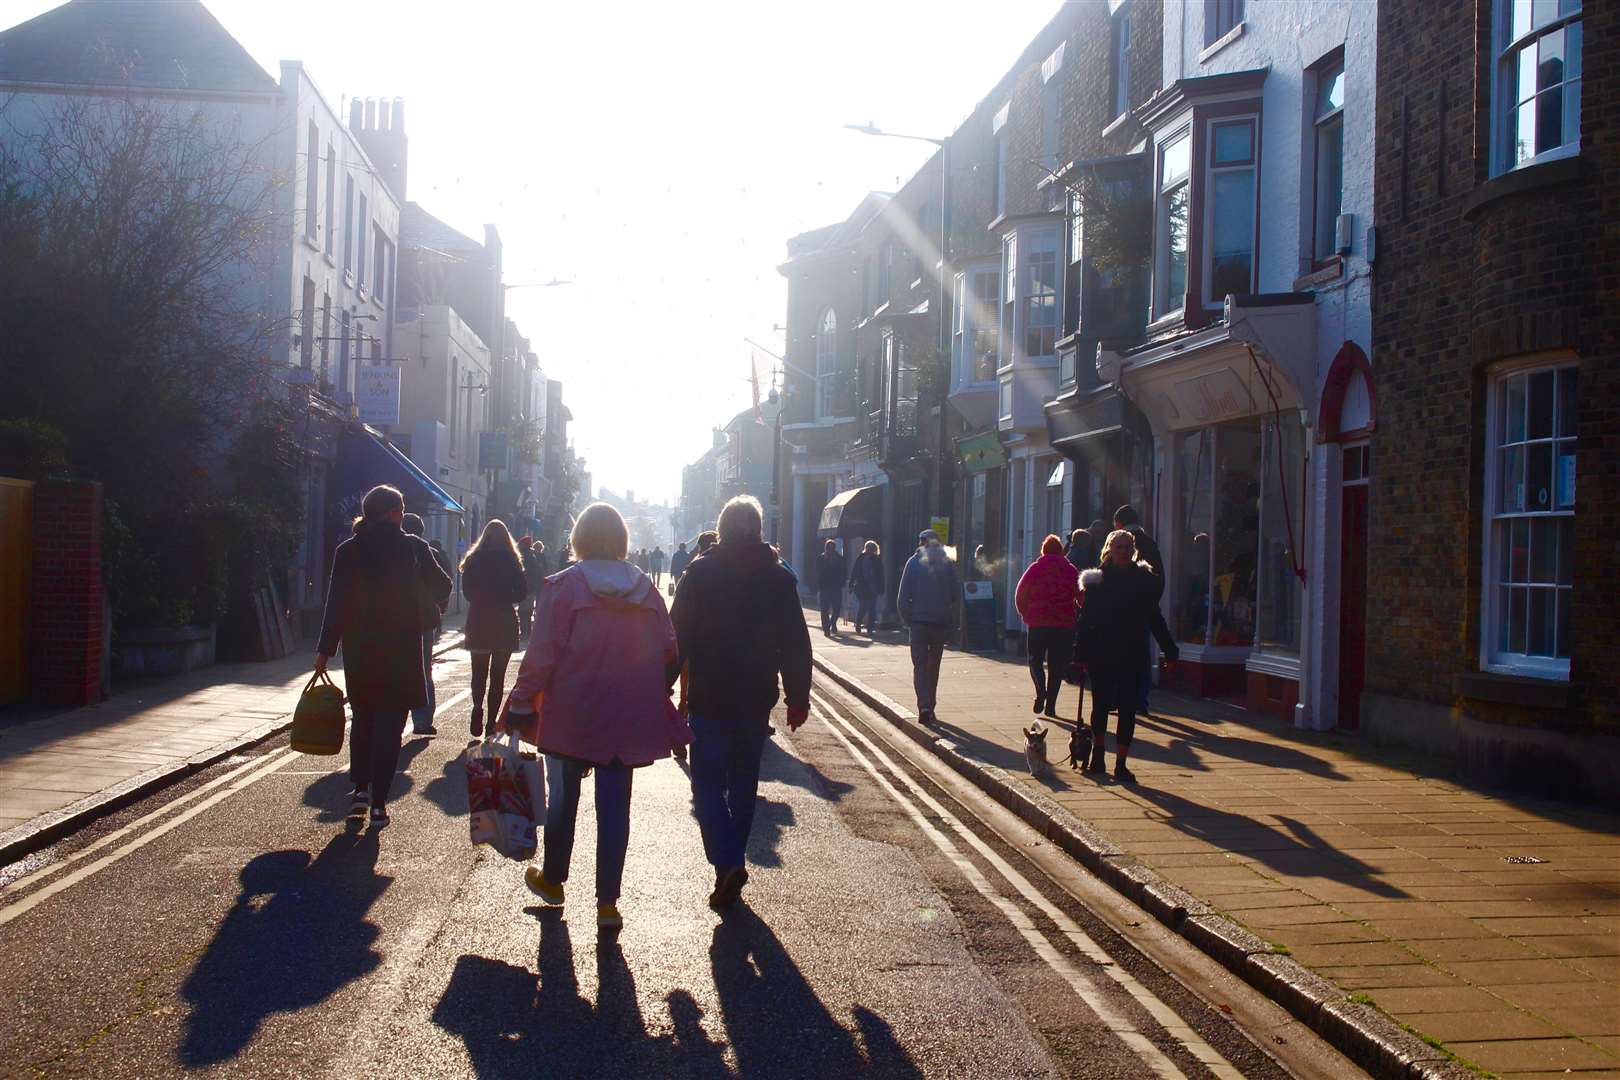 Deal High Street will be pedestrianised again to help social distancing as the town gets busier. Picture Louise Robey